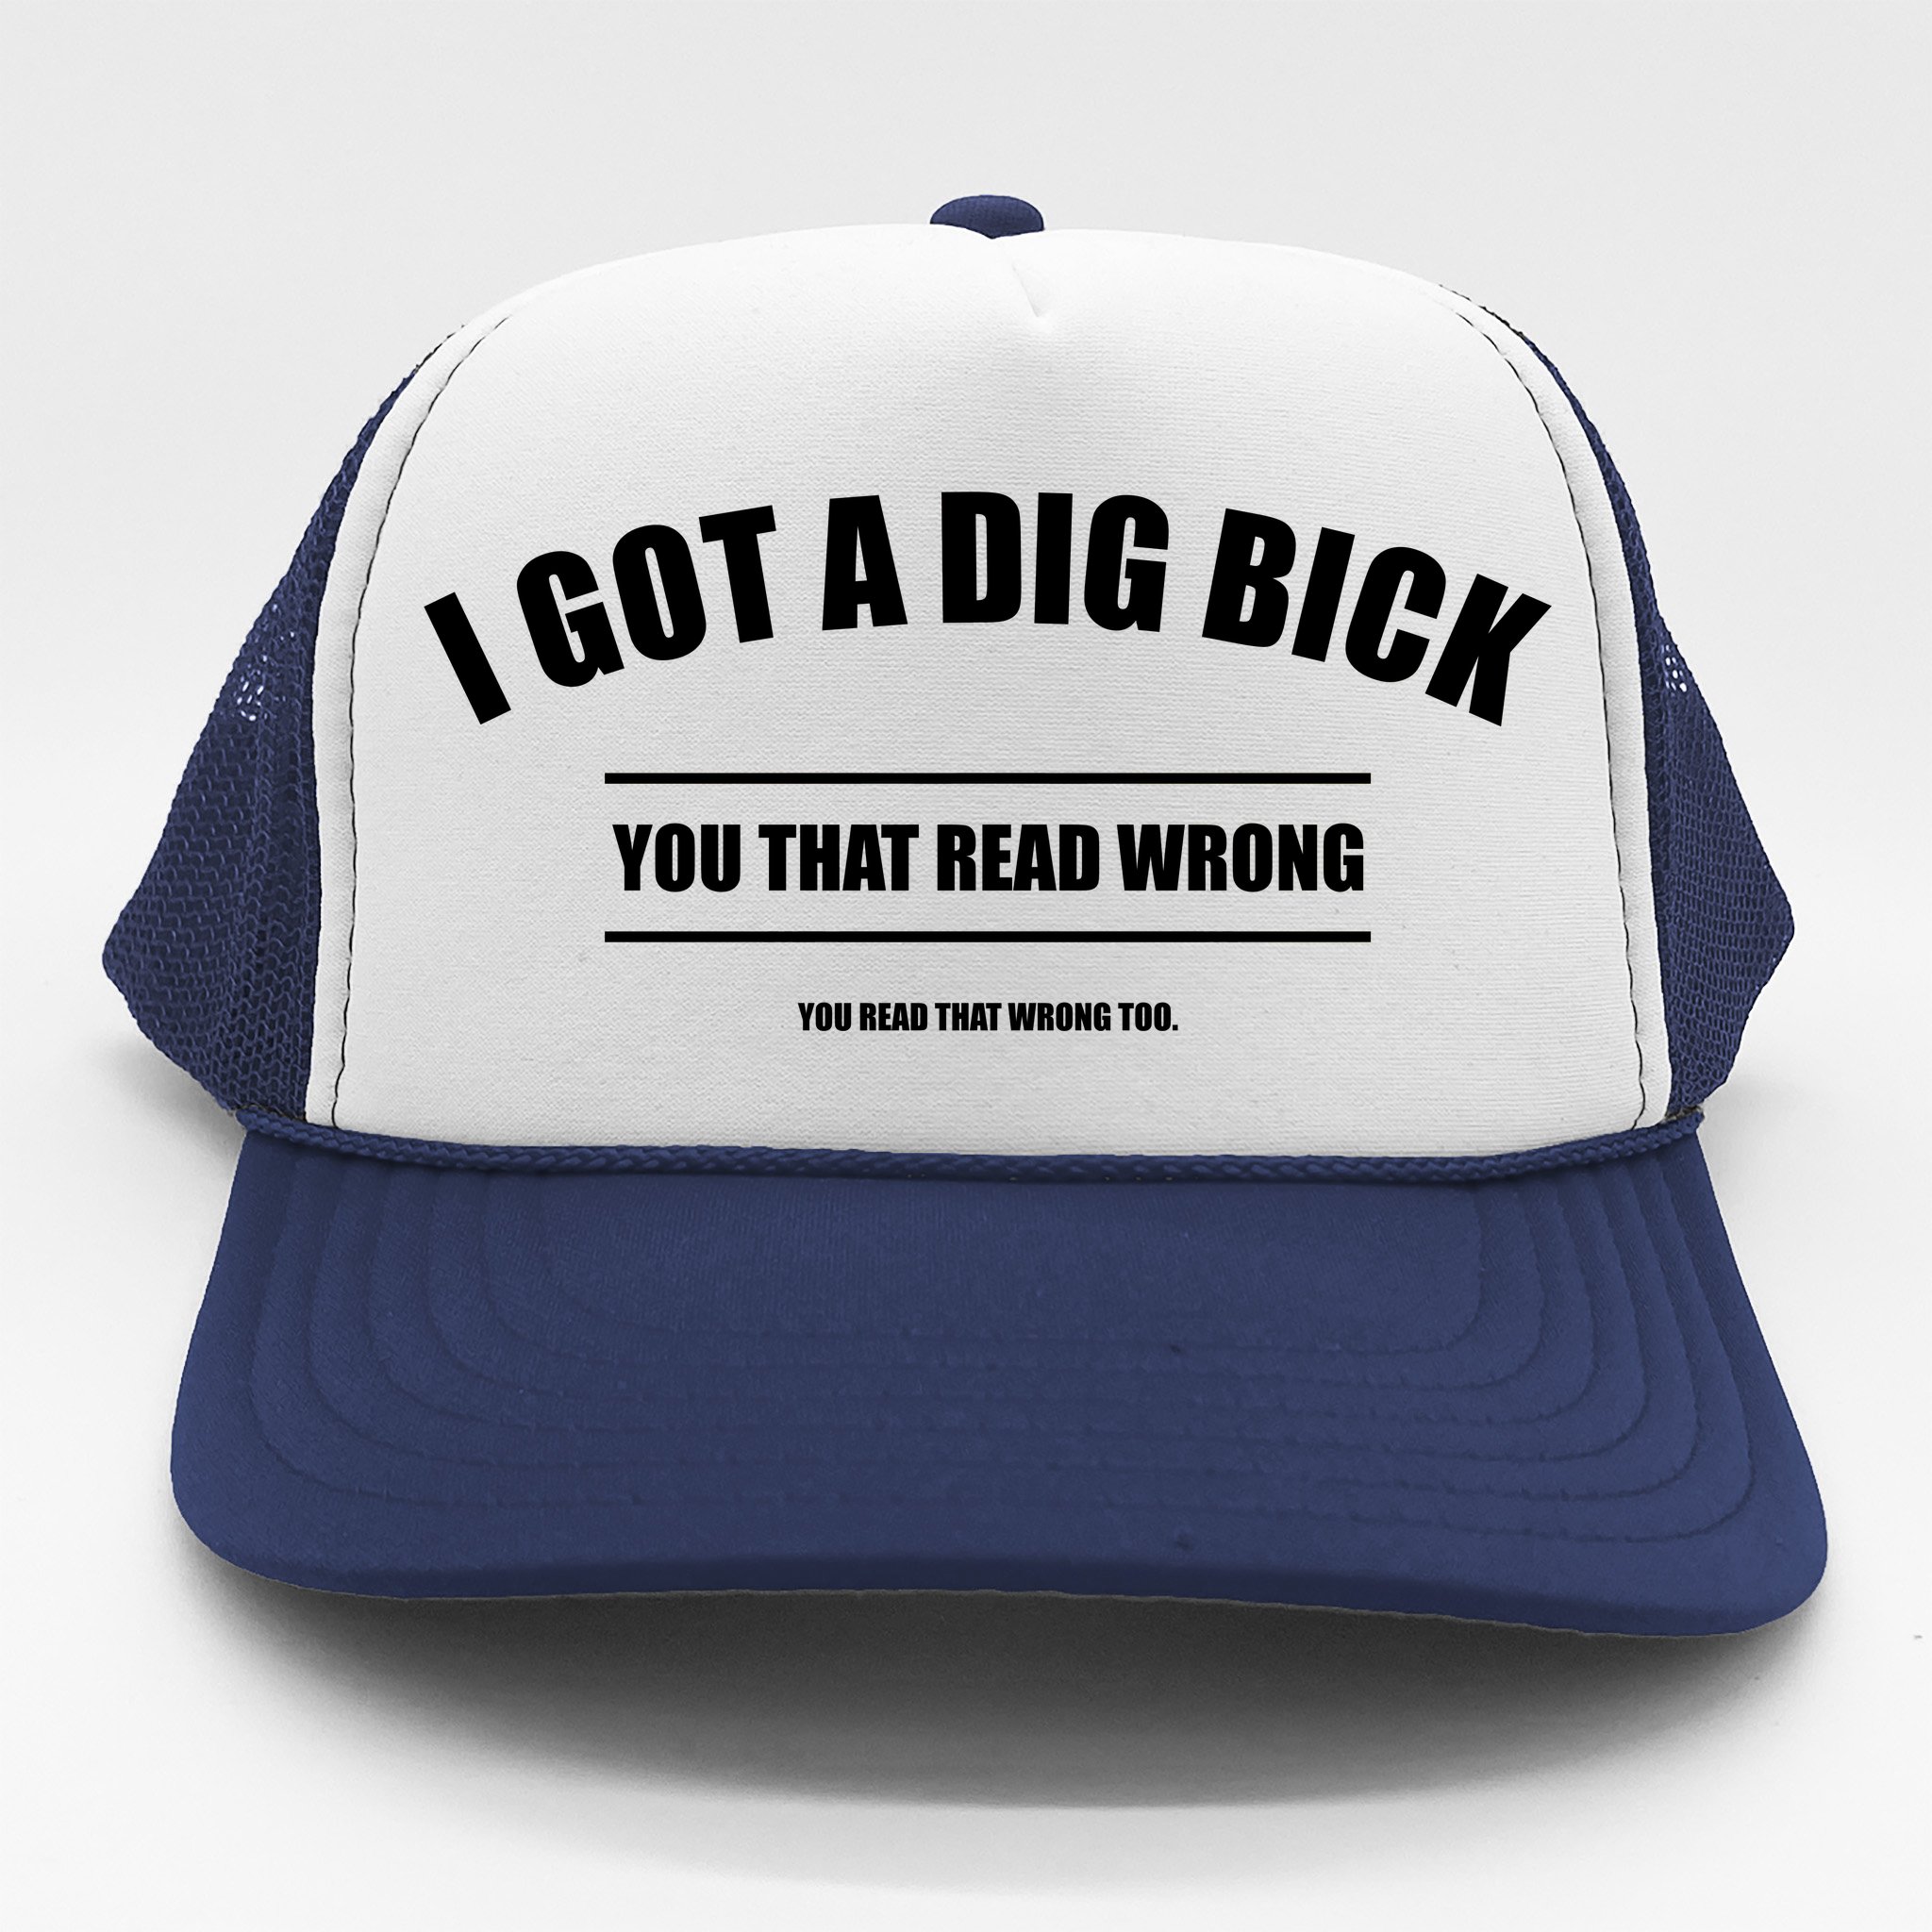 https://images3.teeshirtpalace.com/images/productImages/i-got-a-dig-bick-you-read-that-wrong-funny-word-play--navy-th-garment.jpg